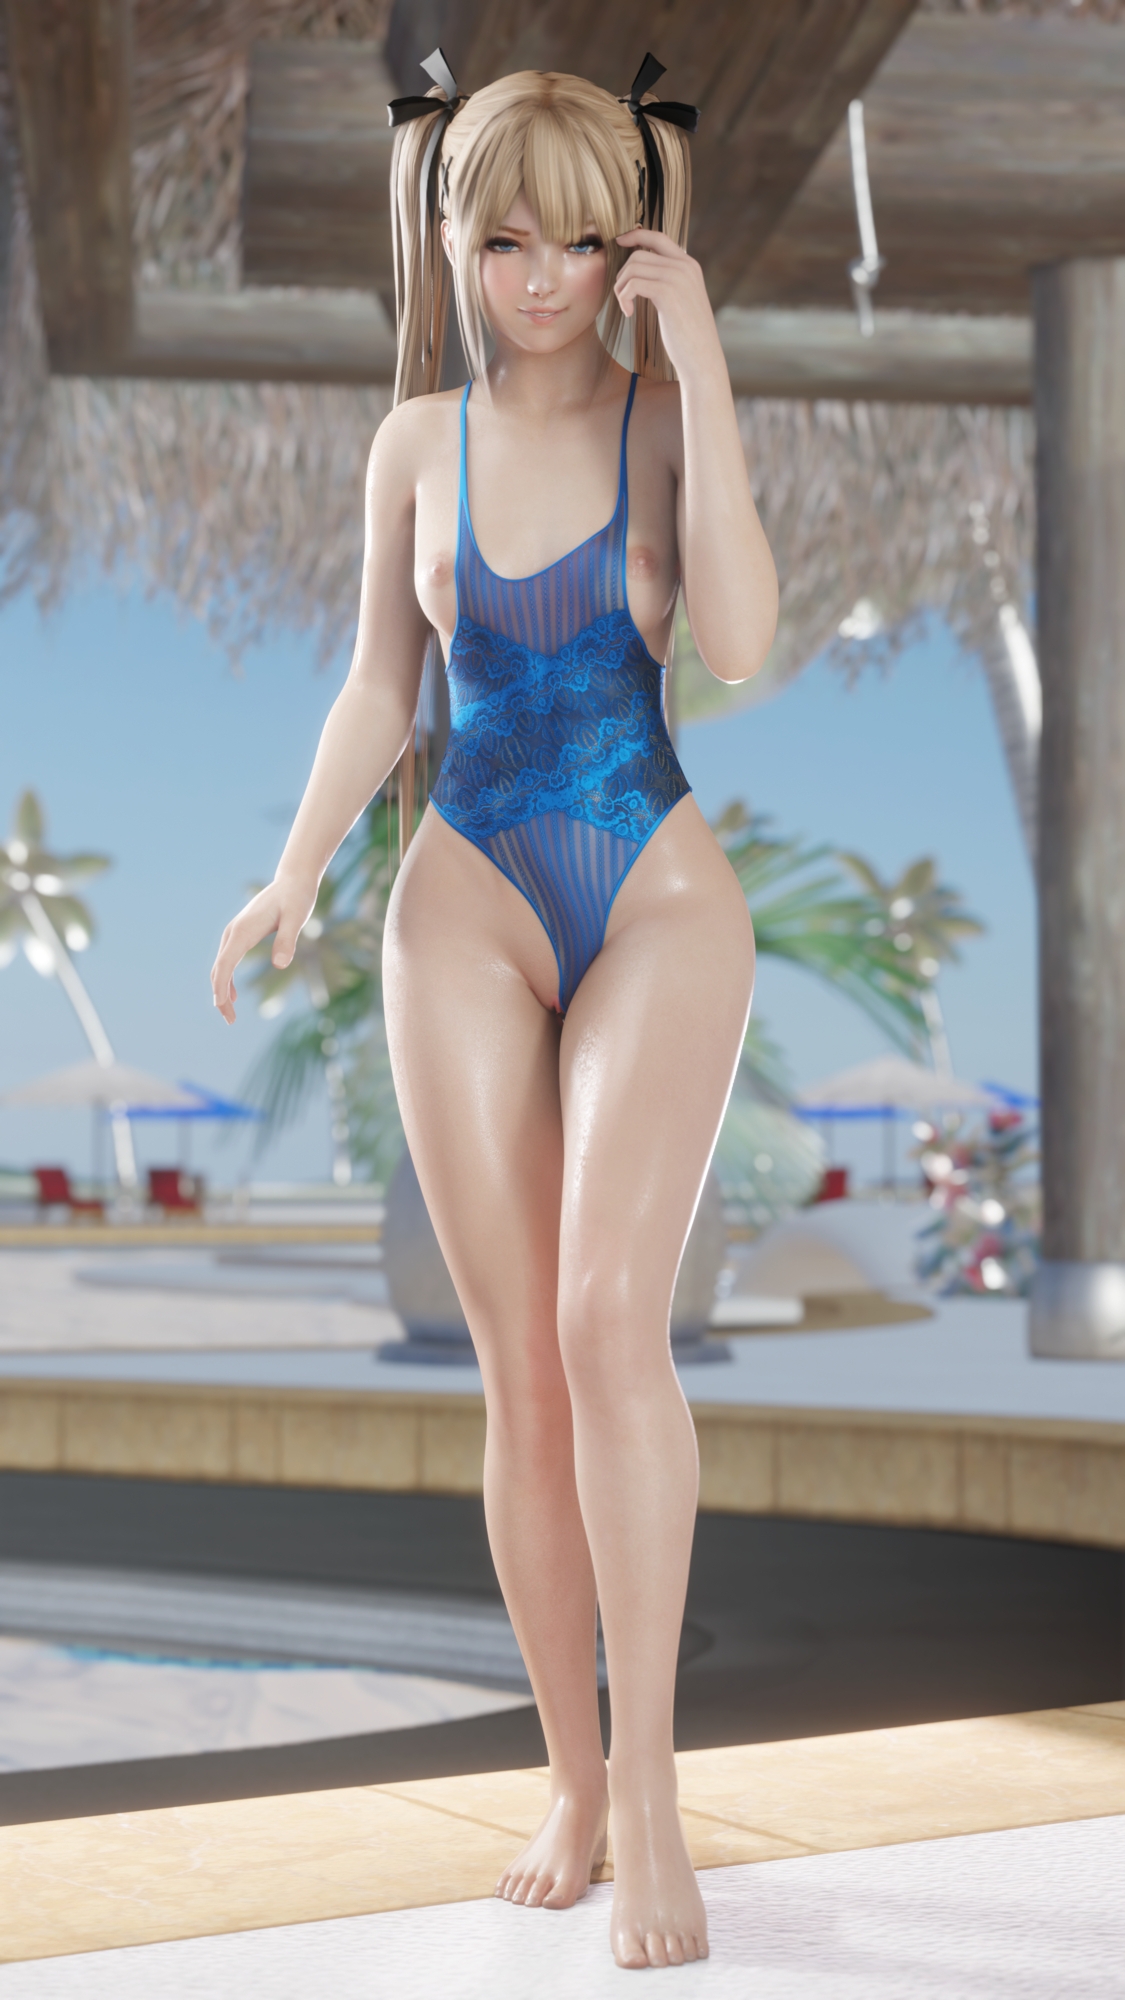 Marie Rose at the pool. Marie Rose Dead Or Alive Looking At Viewer Sexy Posing